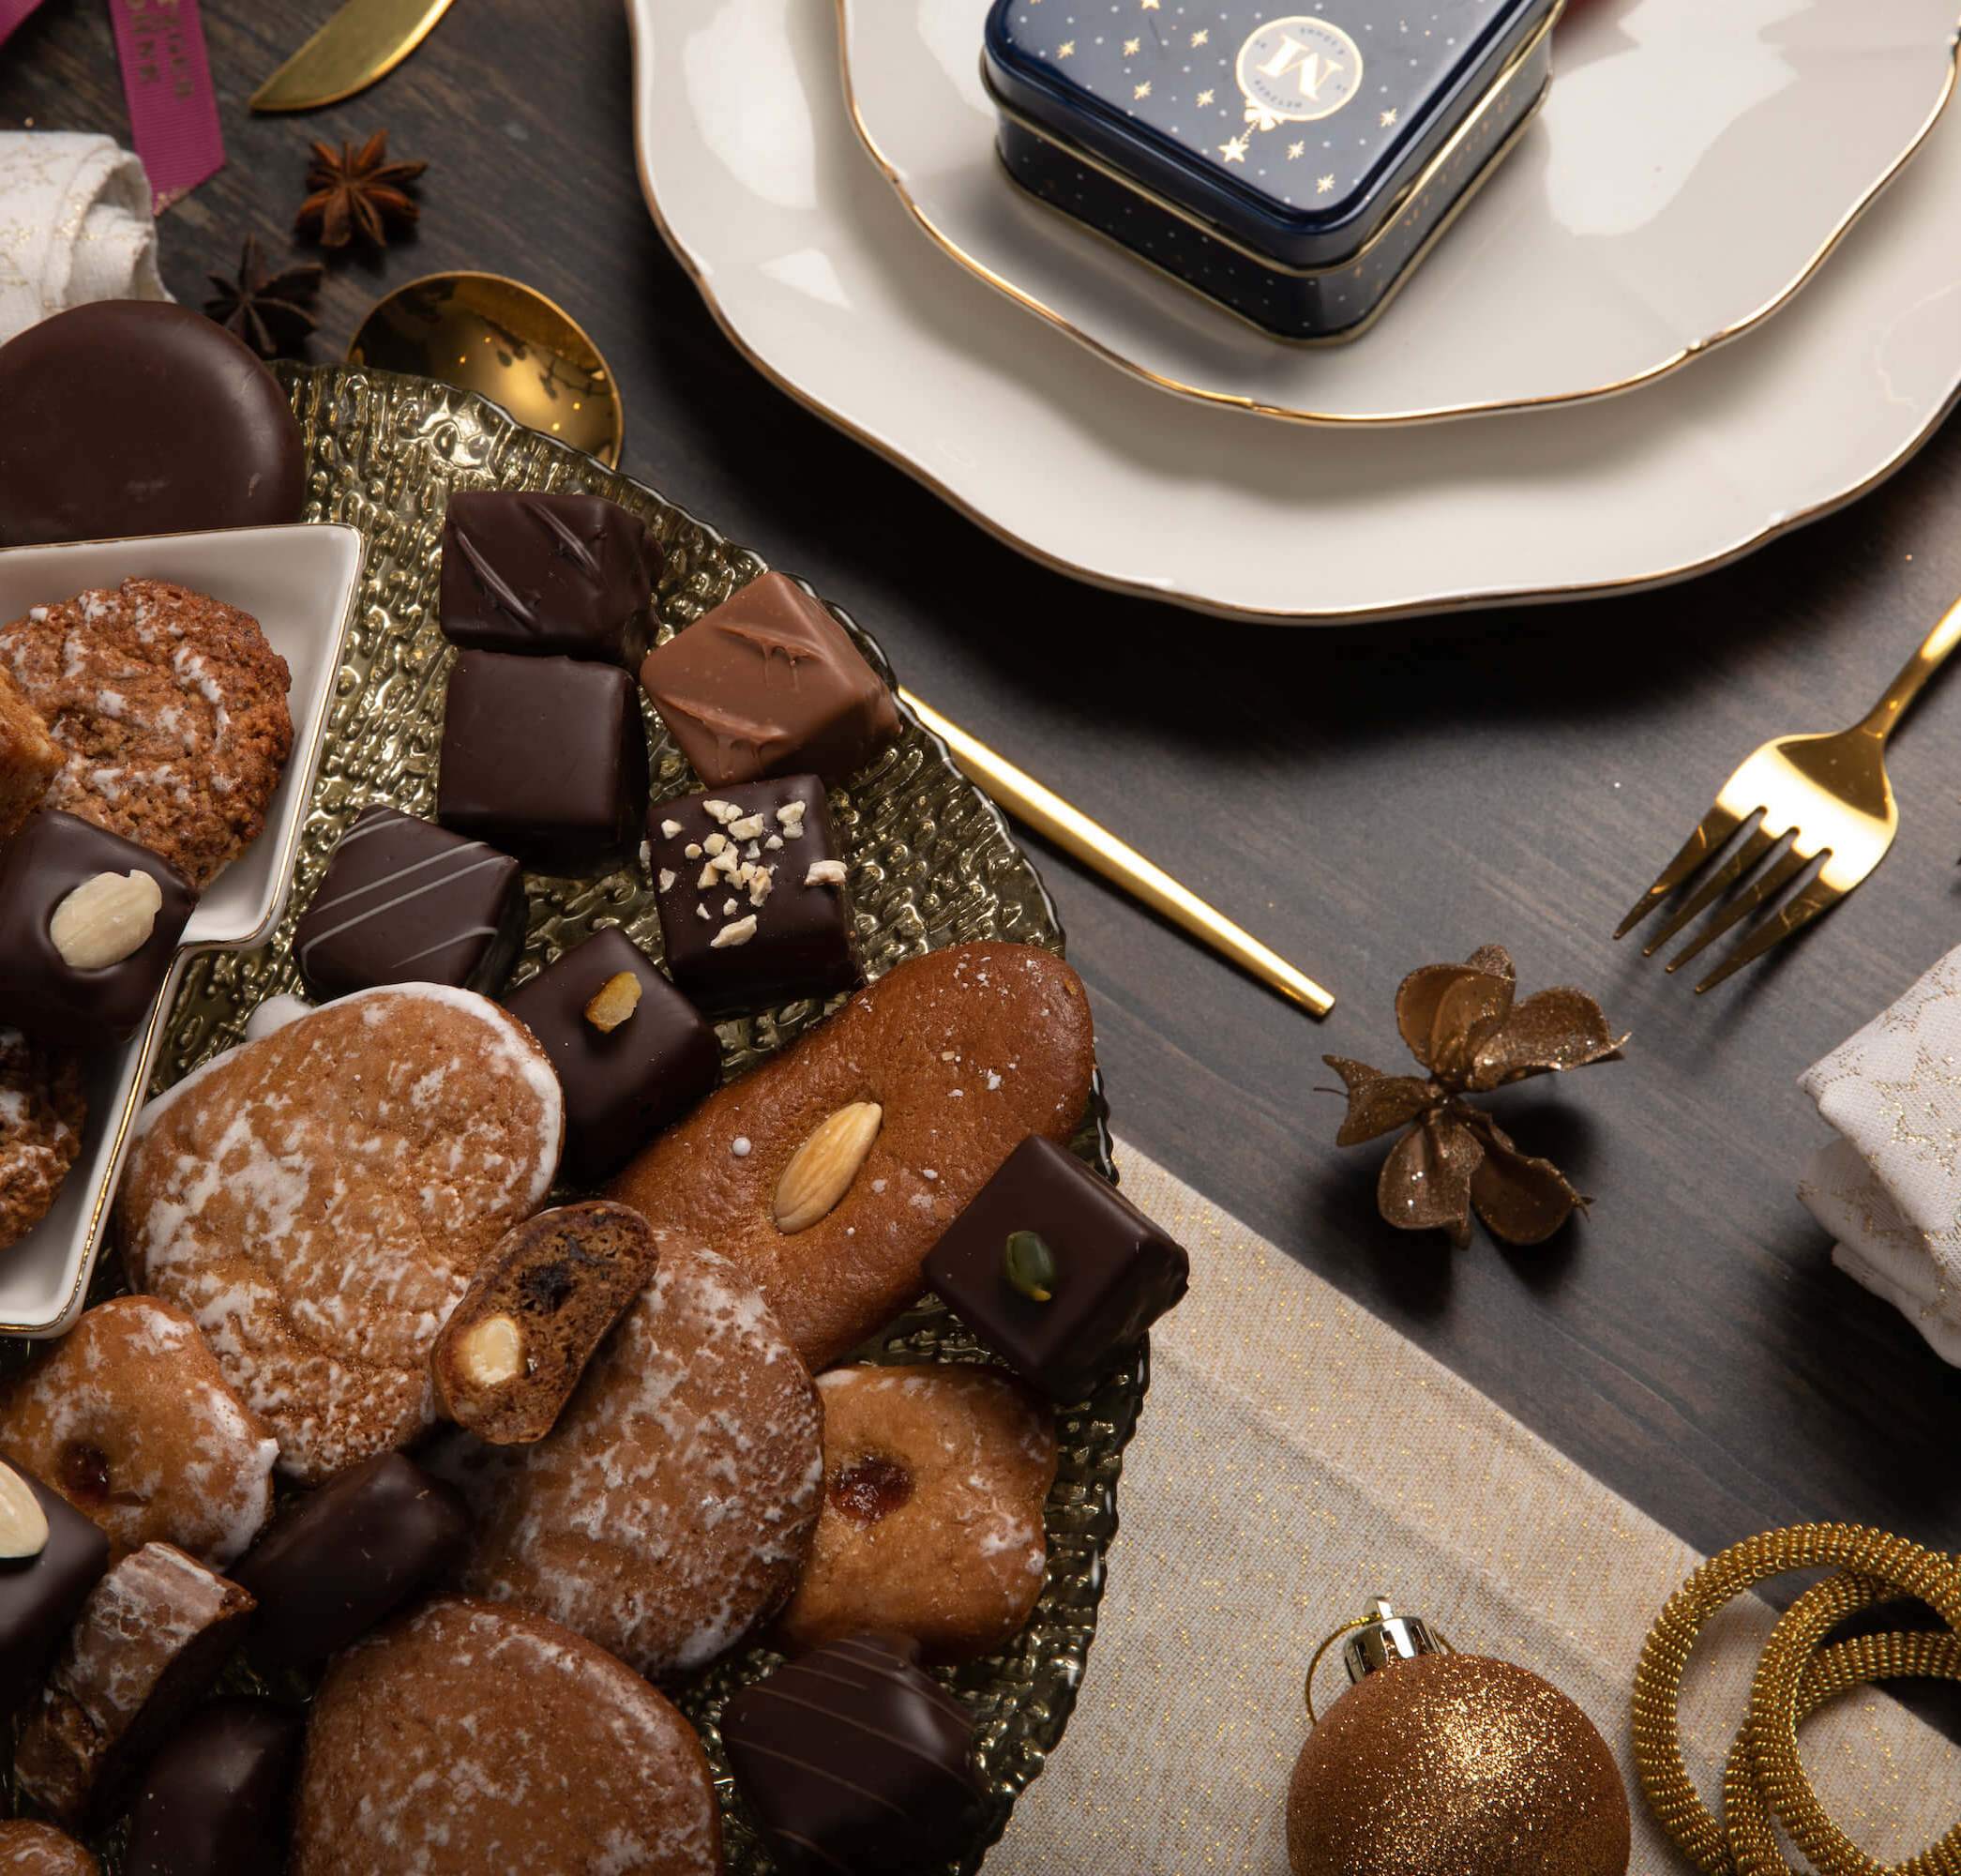 Luxury Metzger gift tin in blue, filled with our popular Lebkuchen cookies and chocolate pralines. There are 10 opulent praline types, from marzipan mixes to fruit jellies, jams and nut fillings, coated in chocolate. The Lebkuchen cookies include our fruit bread with dried fruits and nuts, basler with a cherry undertone, chocolate robbins, signature house Lebkuchen and Aranzini Lebkuchen minis. A perfect Lebkuchen taster gift or selection for the Christmas table.